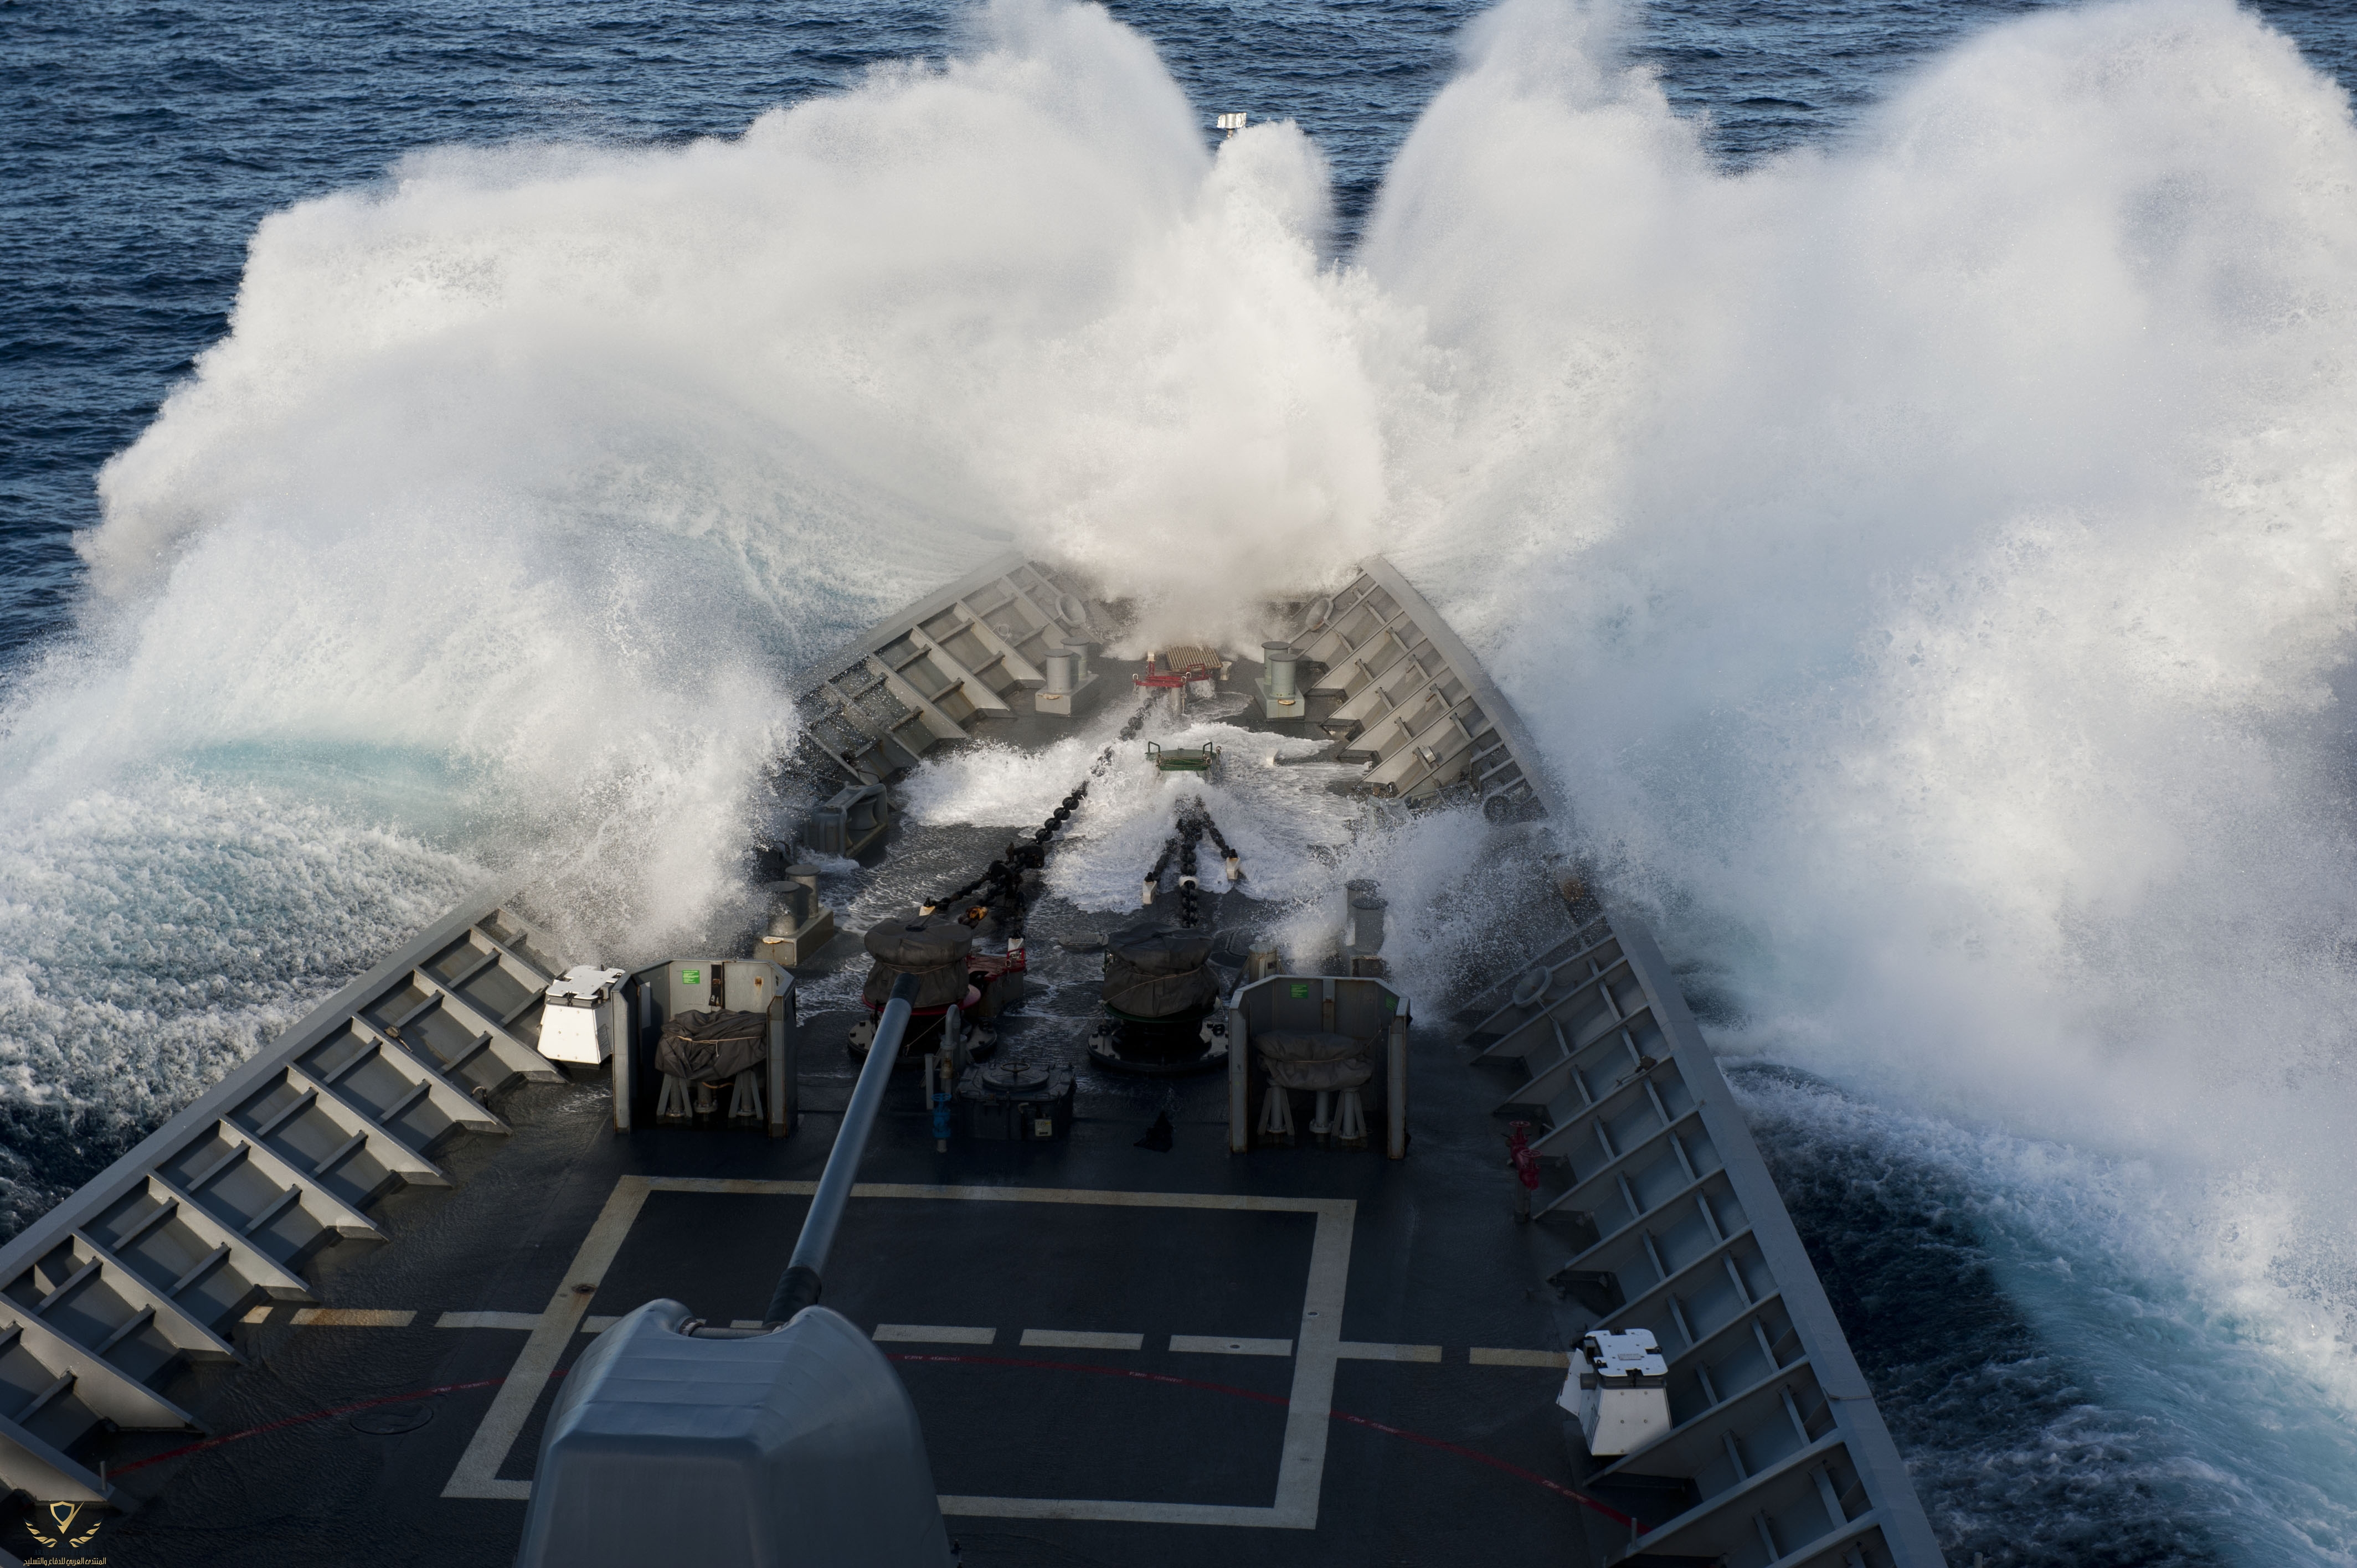 Flickr_-_Official_U.S._Navy_Imagery_-_USS_Cowpens_moves_through_heavy_seas.-1.jpg